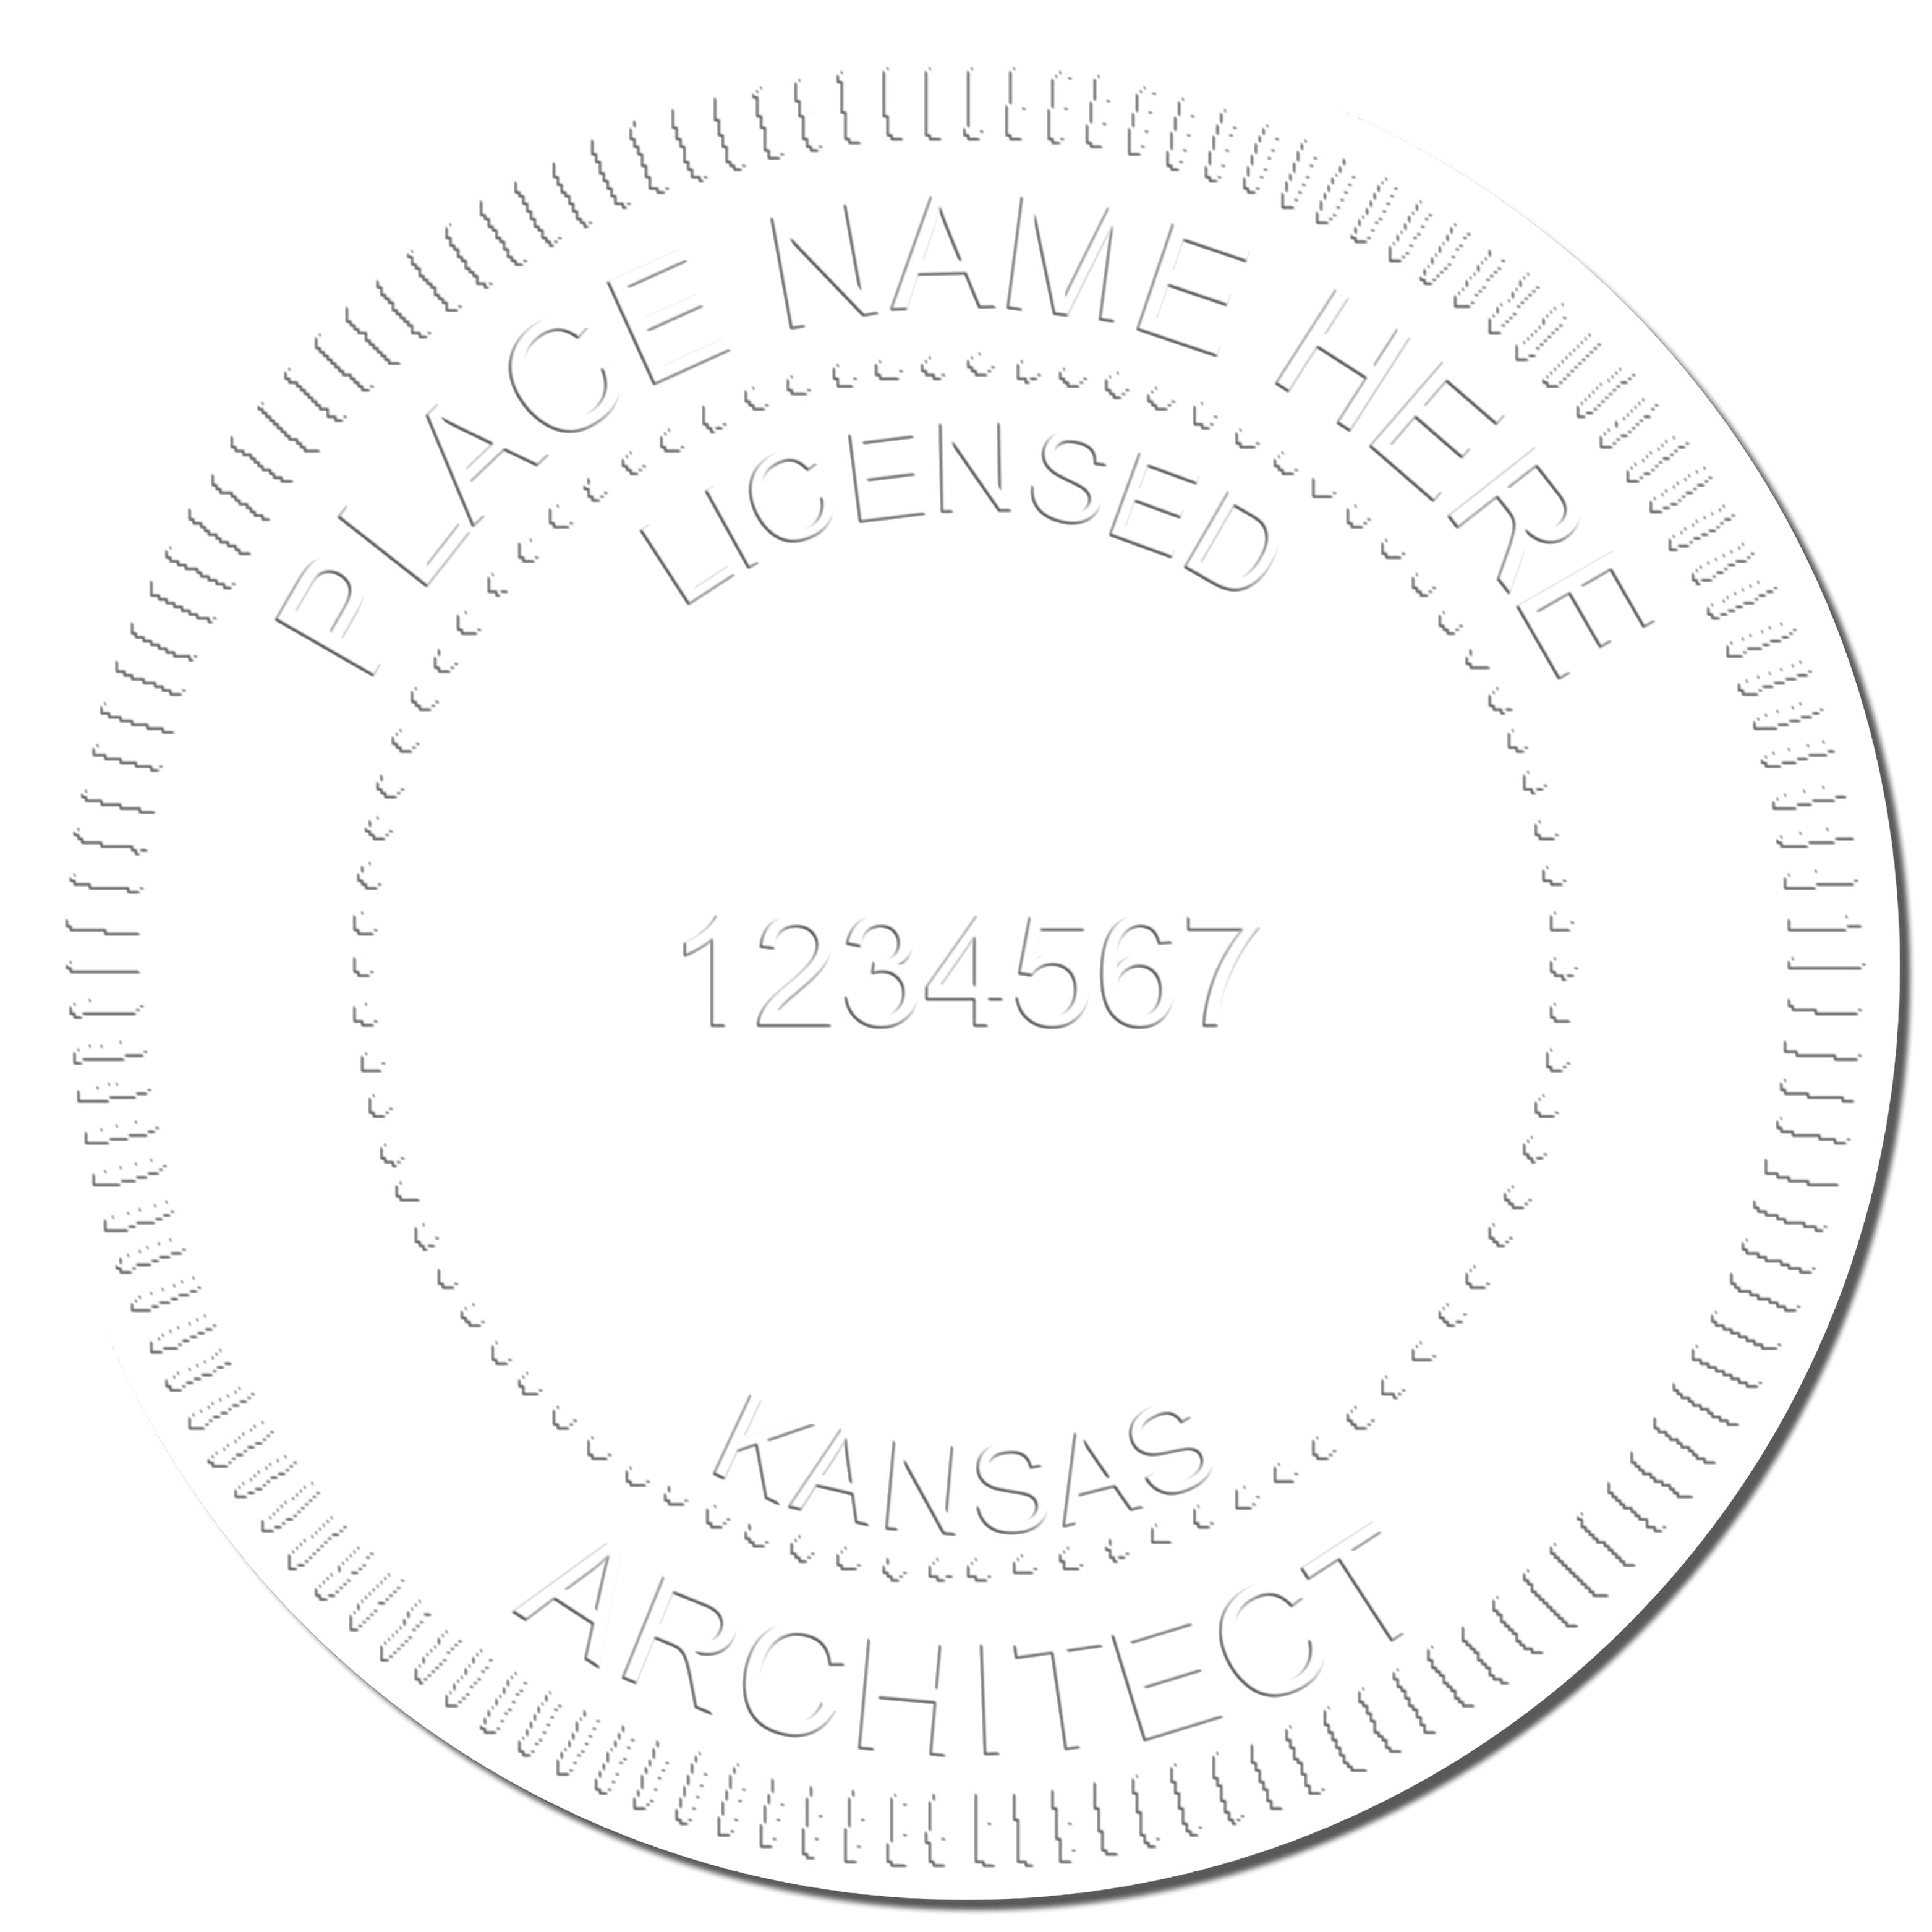 This paper is stamped with a sample imprint of the Heavy Duty Cast Iron Kansas Architect Embosser, signifying its quality and reliability.